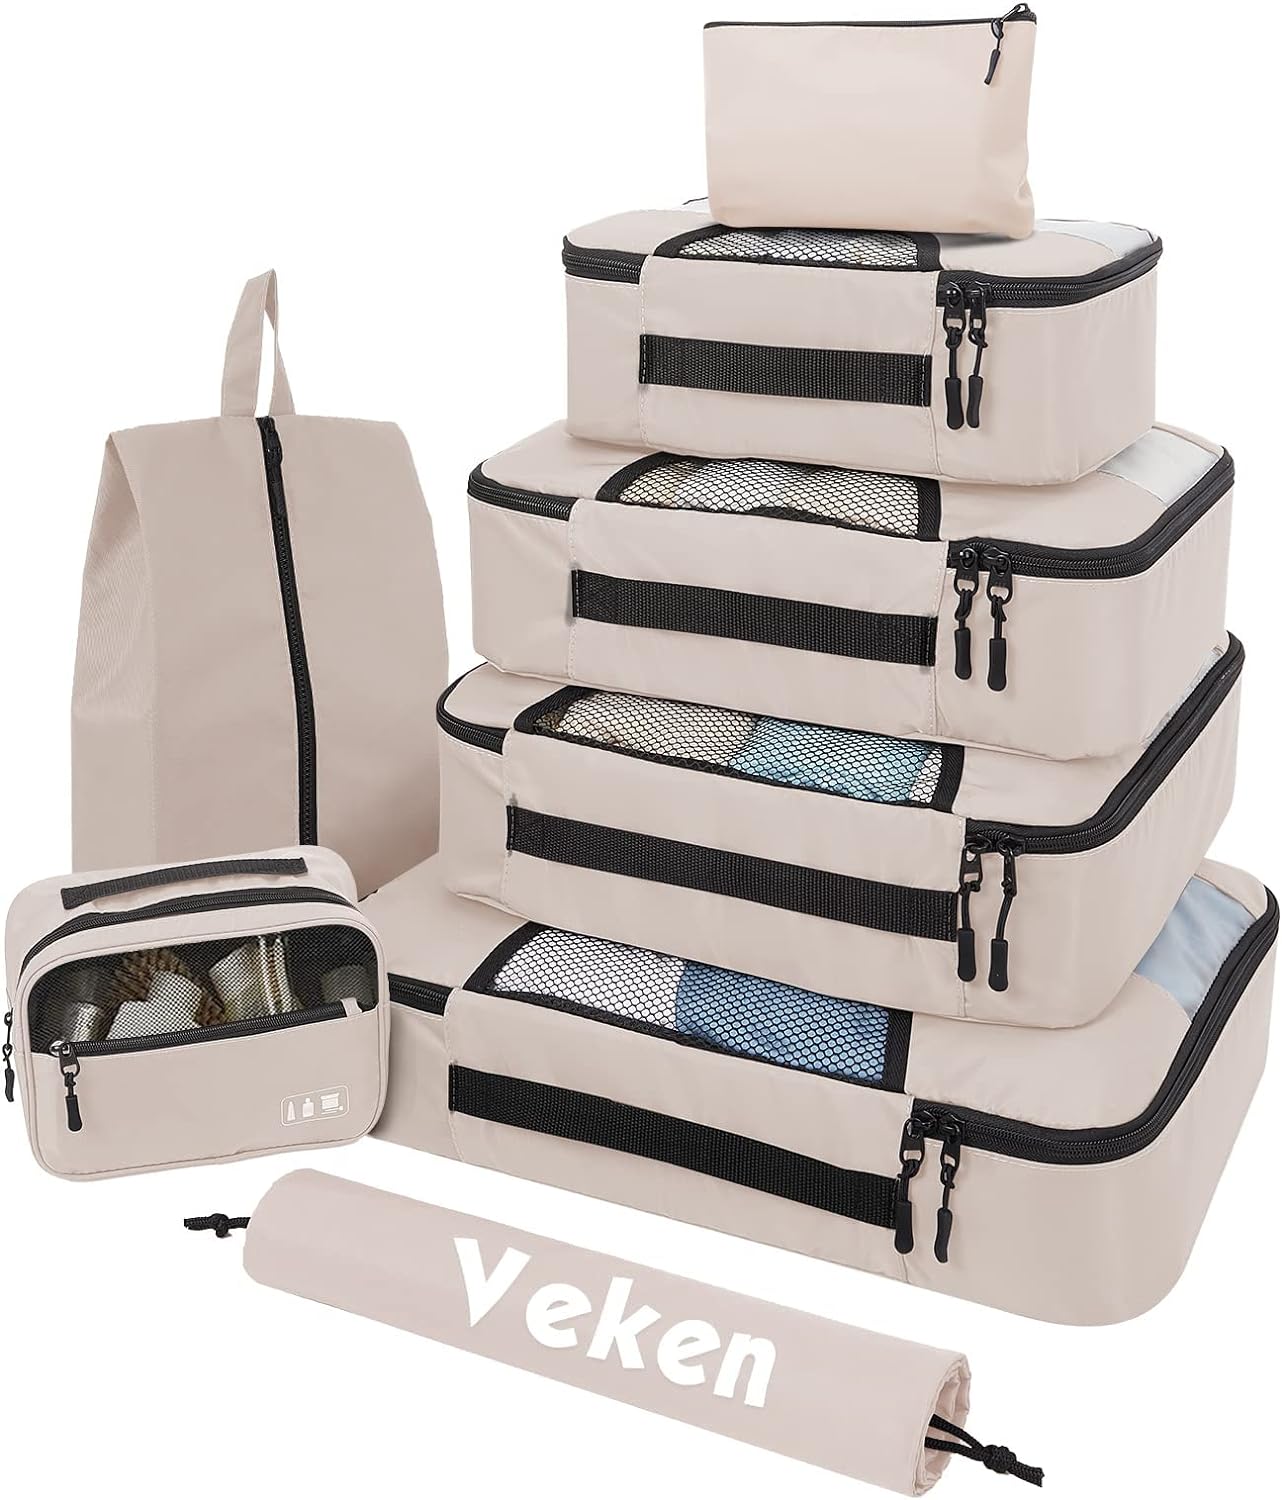 Veken 8 Set Packing Cubes for Suitcases, Travel Bag Organizers for Carry on Luggage, Suitcase Organizer Bags Set for Travel Essentials Travel Accessories 